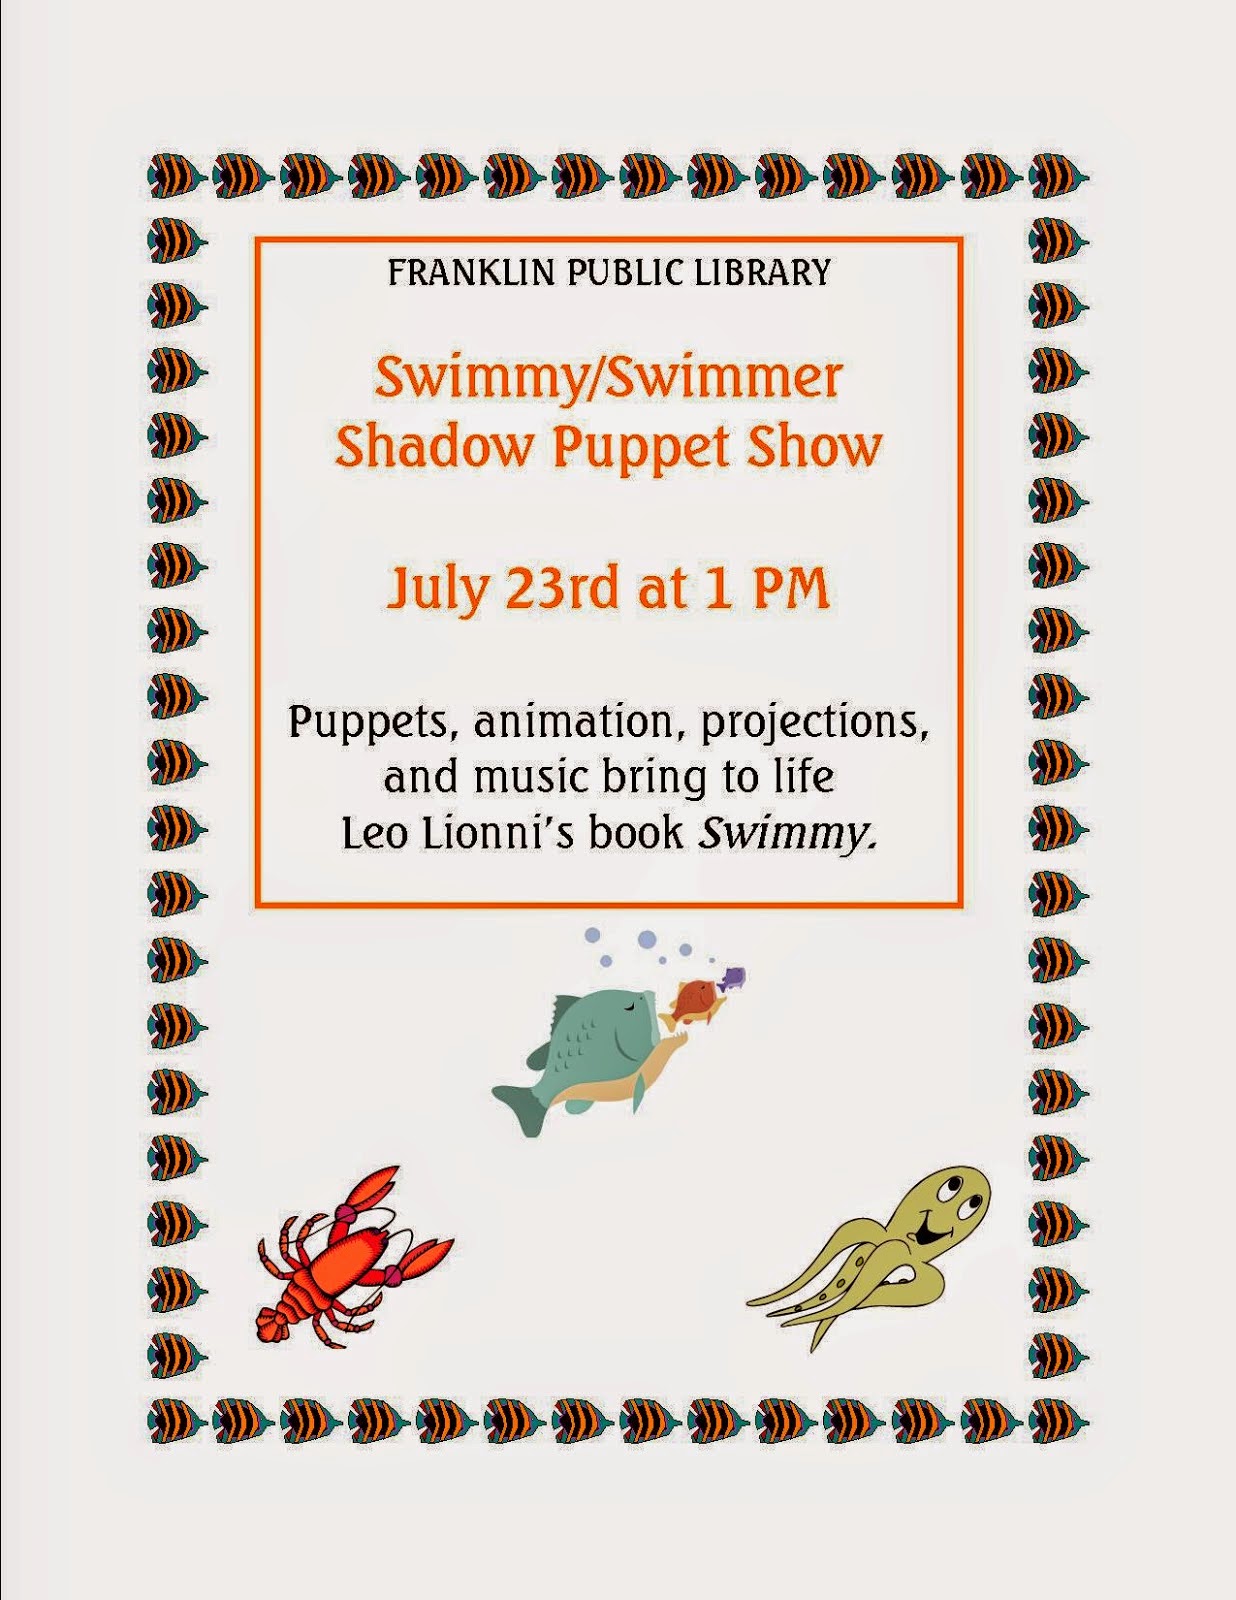 shadow puppet show - July 23  1:00 PM